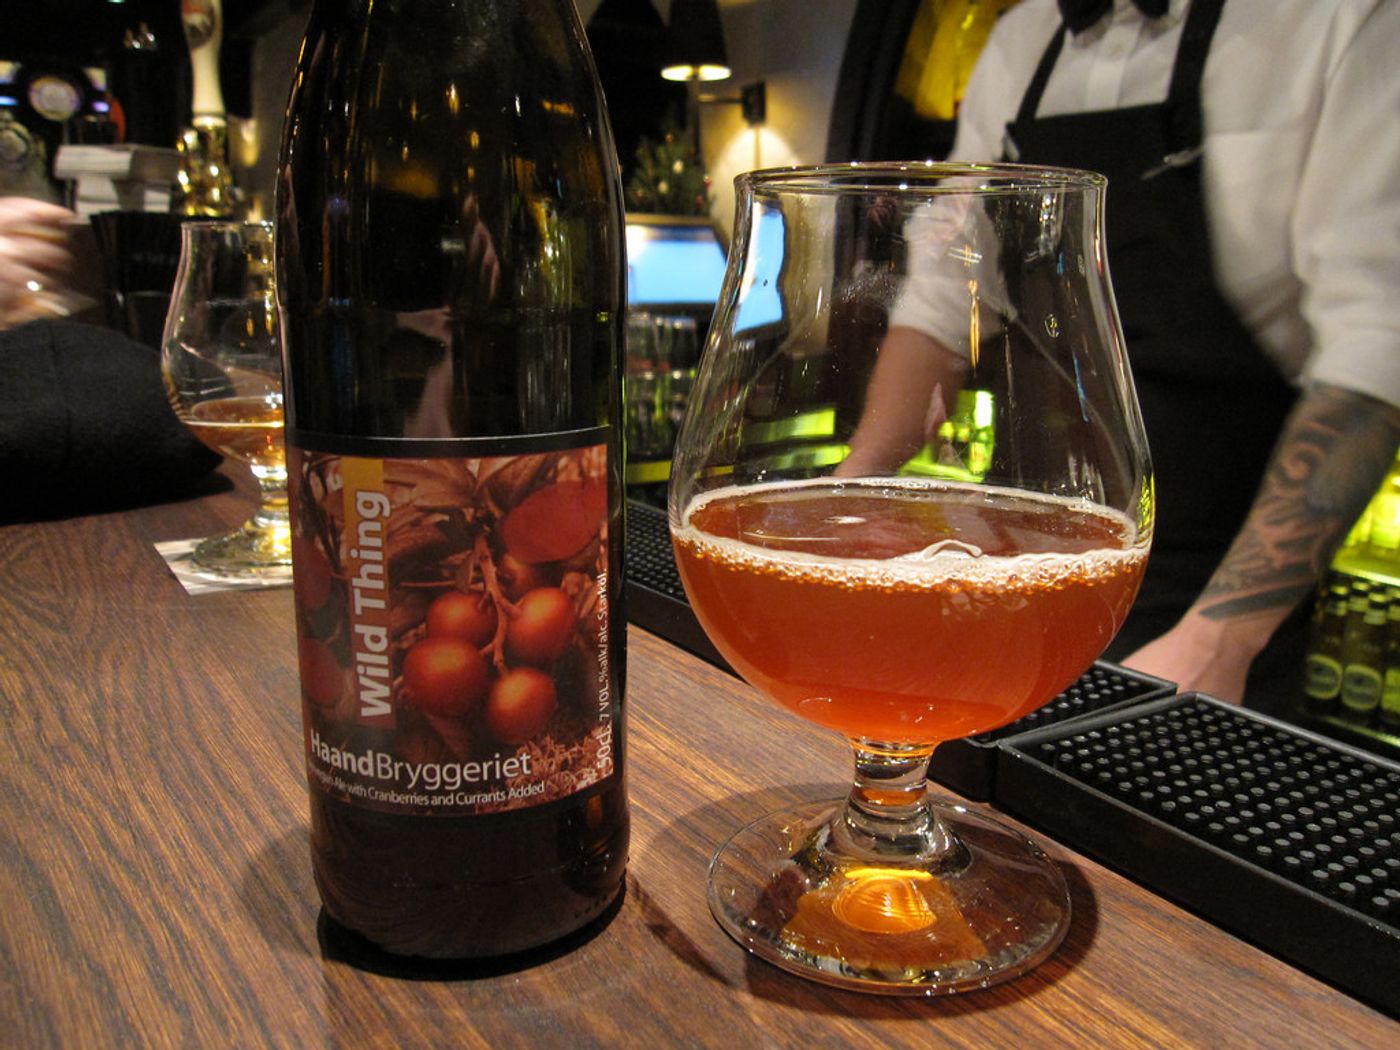 A bottle of Wild Thing from HaandBryggeriet in Drammen, Norway, at Håndverkerstuene in Oslo. Wild Thing is a 7% abv traditional Norwegian Ale brewed with wild yeast and with Cranberries and Currants added. / Credit: Flickr/Bernt Rostad